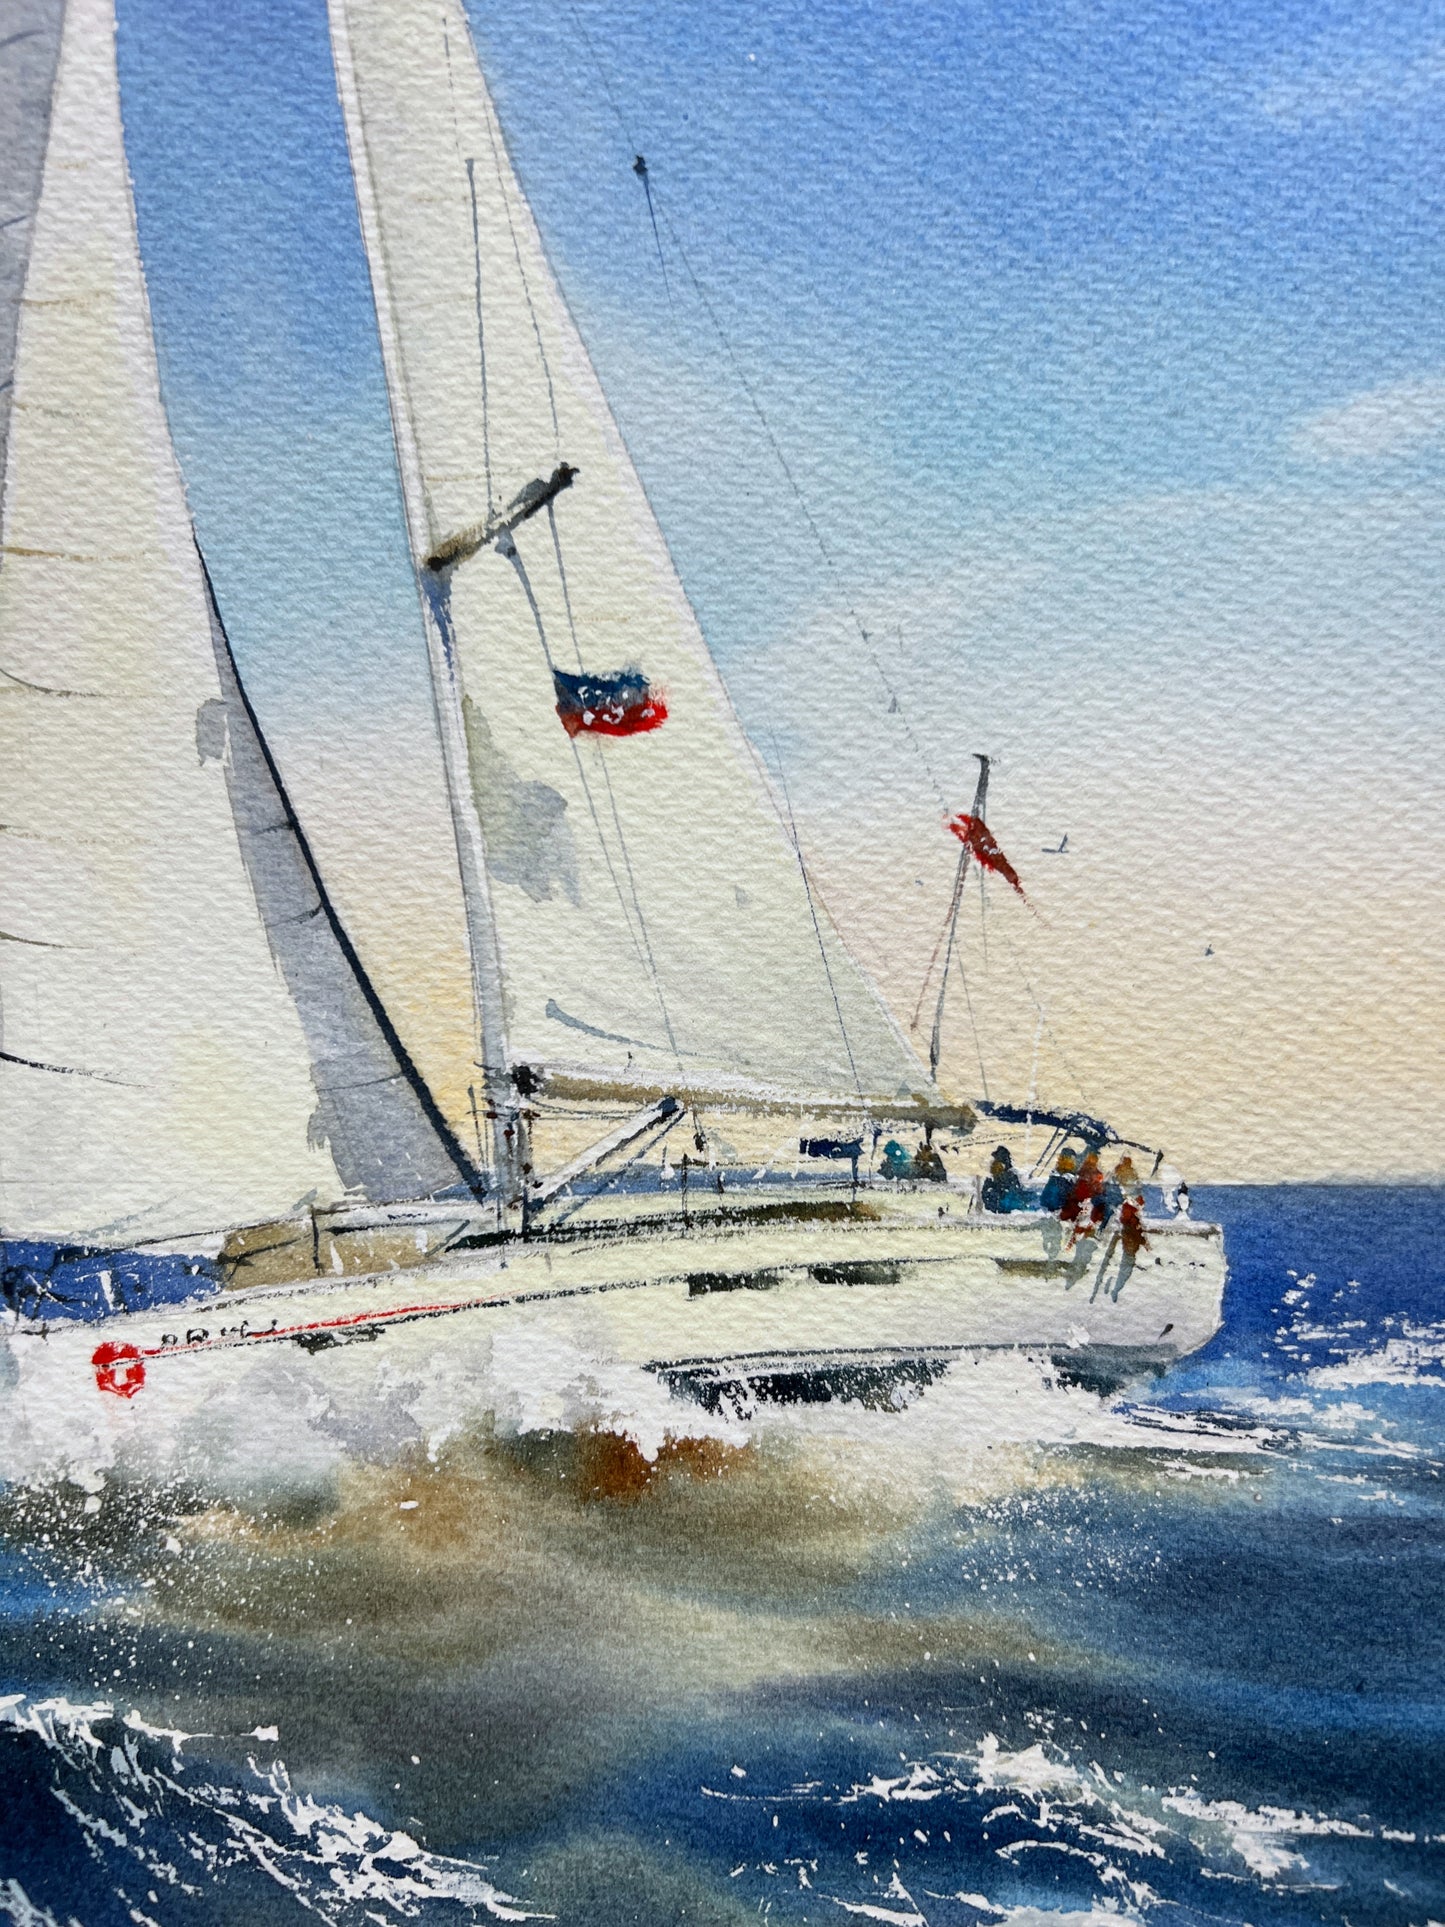 Sailboat Painting Original Watercolor, Seascape Coast Art -Yacht on the waves #5